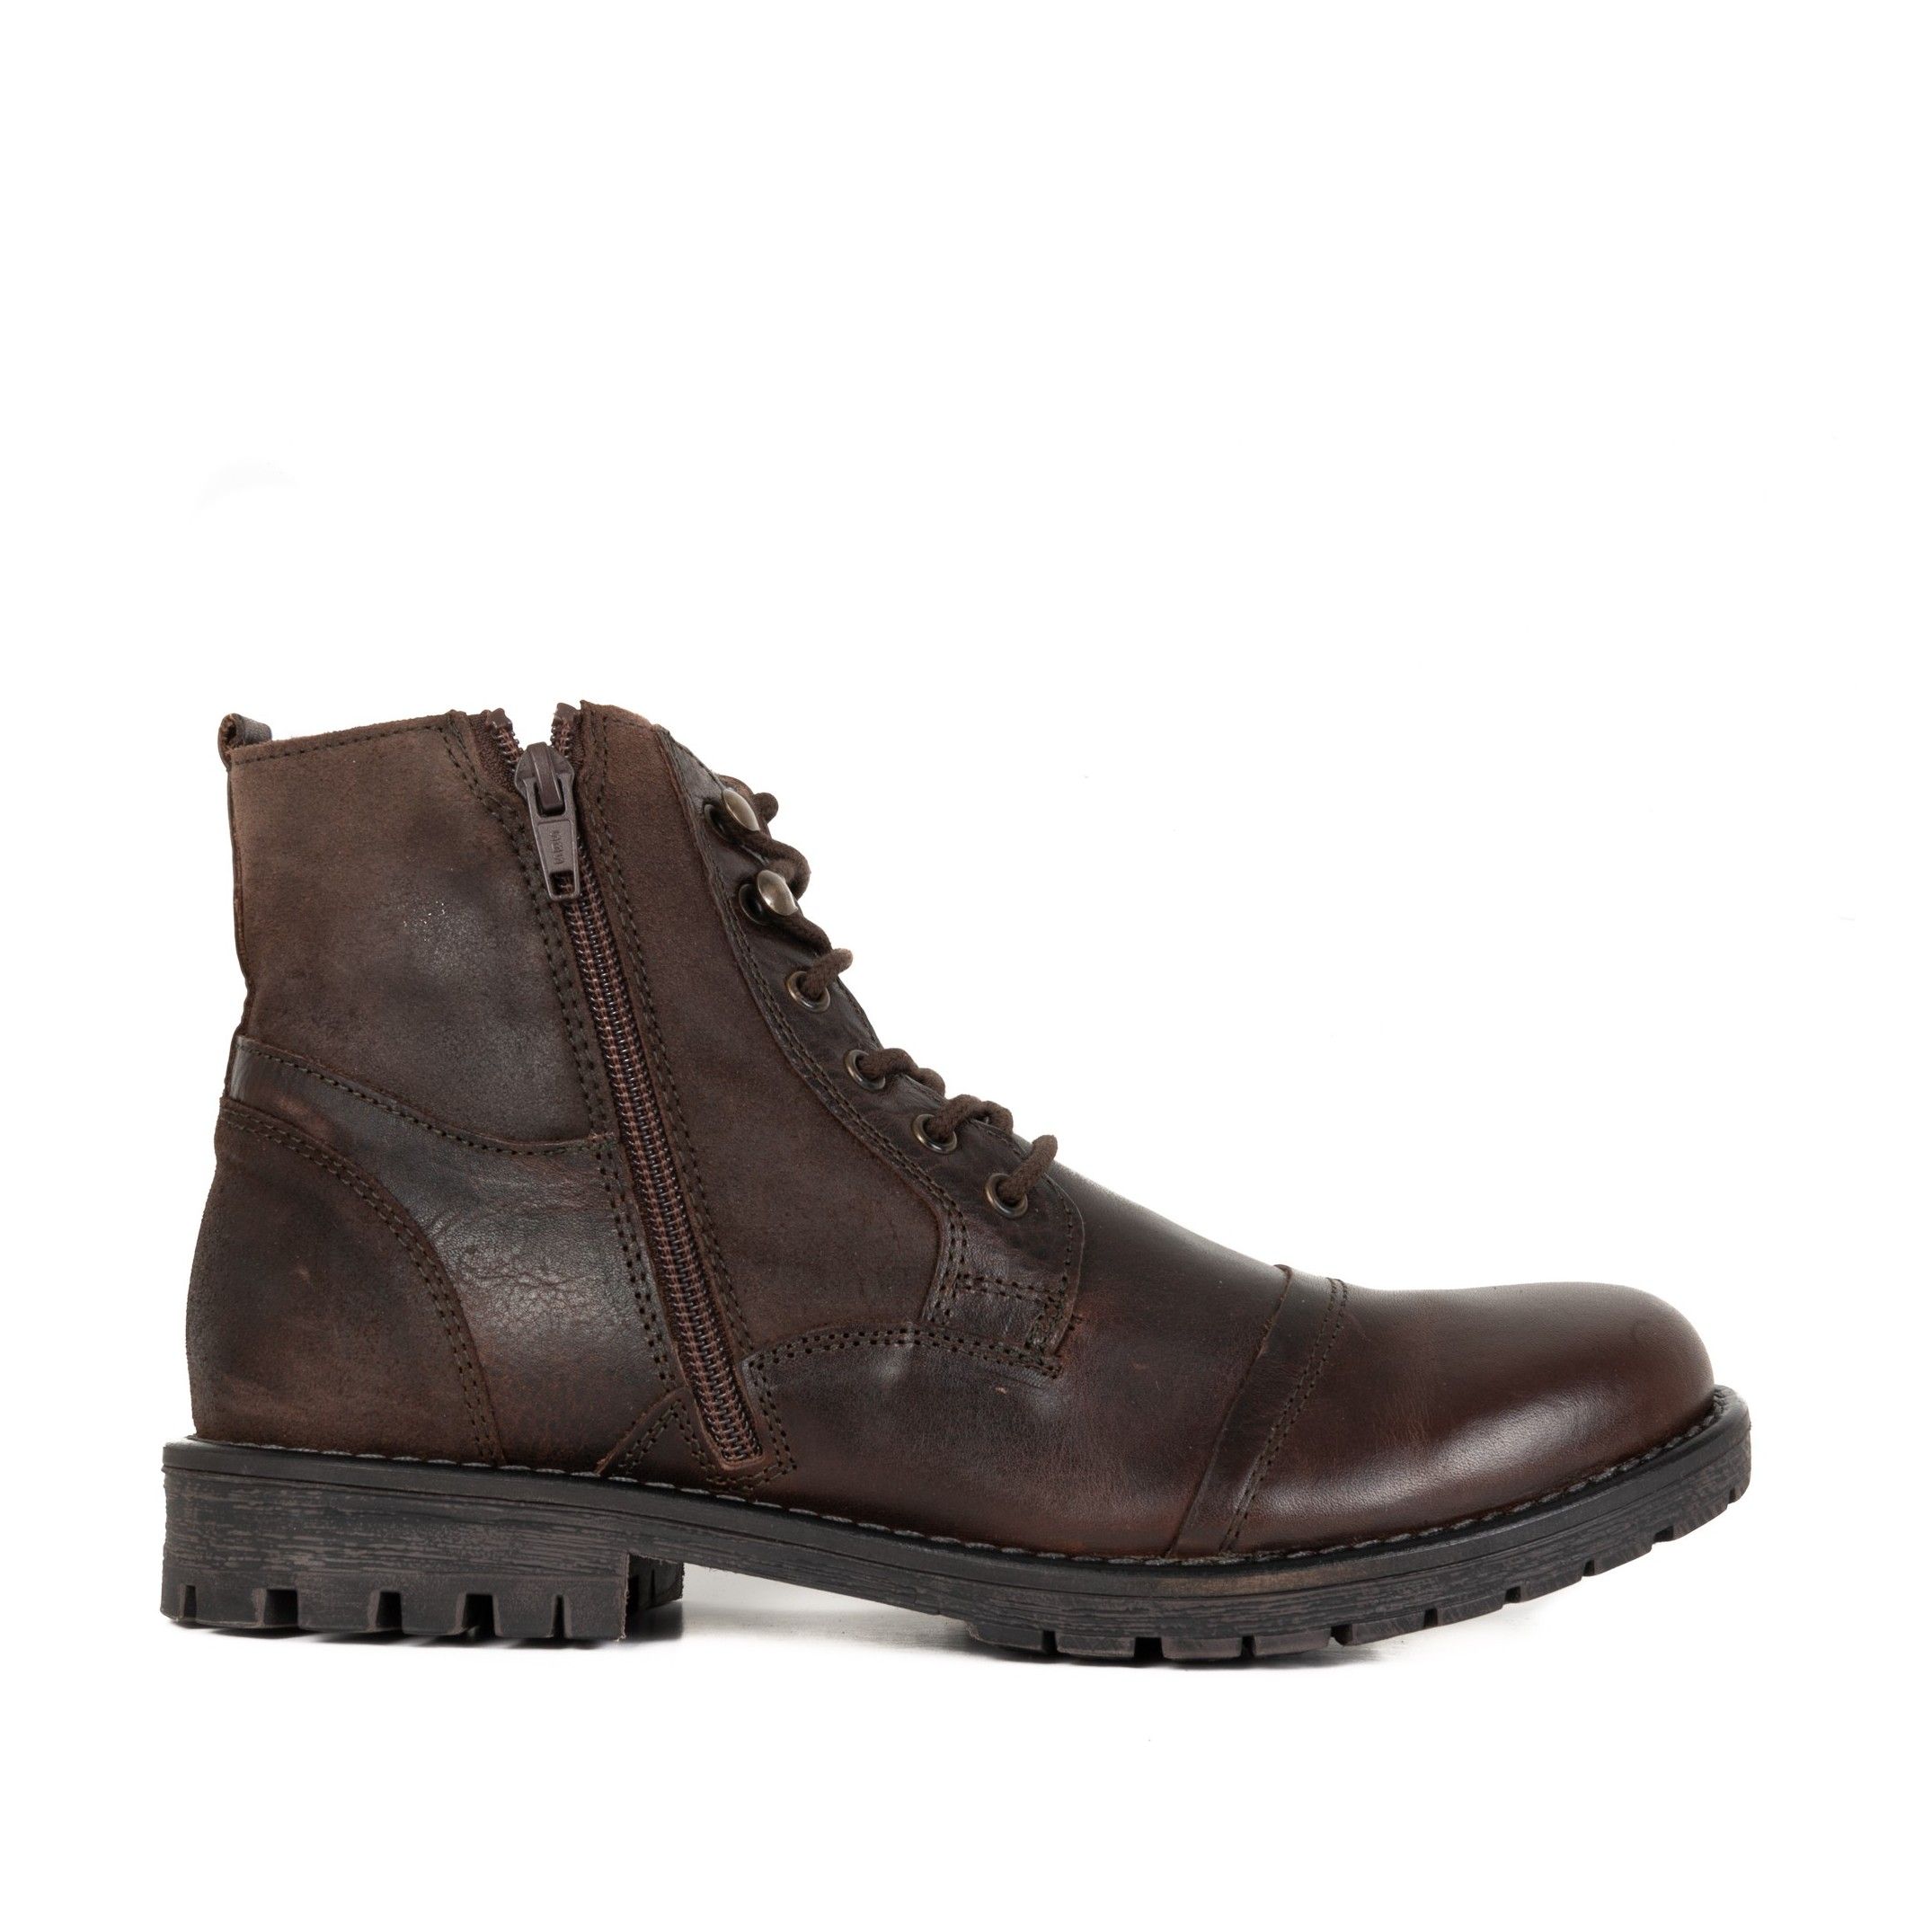 Leather boot by Son Castellanisimos. Closure: laces. Upper: leather. Innerr: textile. Insole: textile. Sole: non-slip. Heel: 3 cm. Made in Spain.